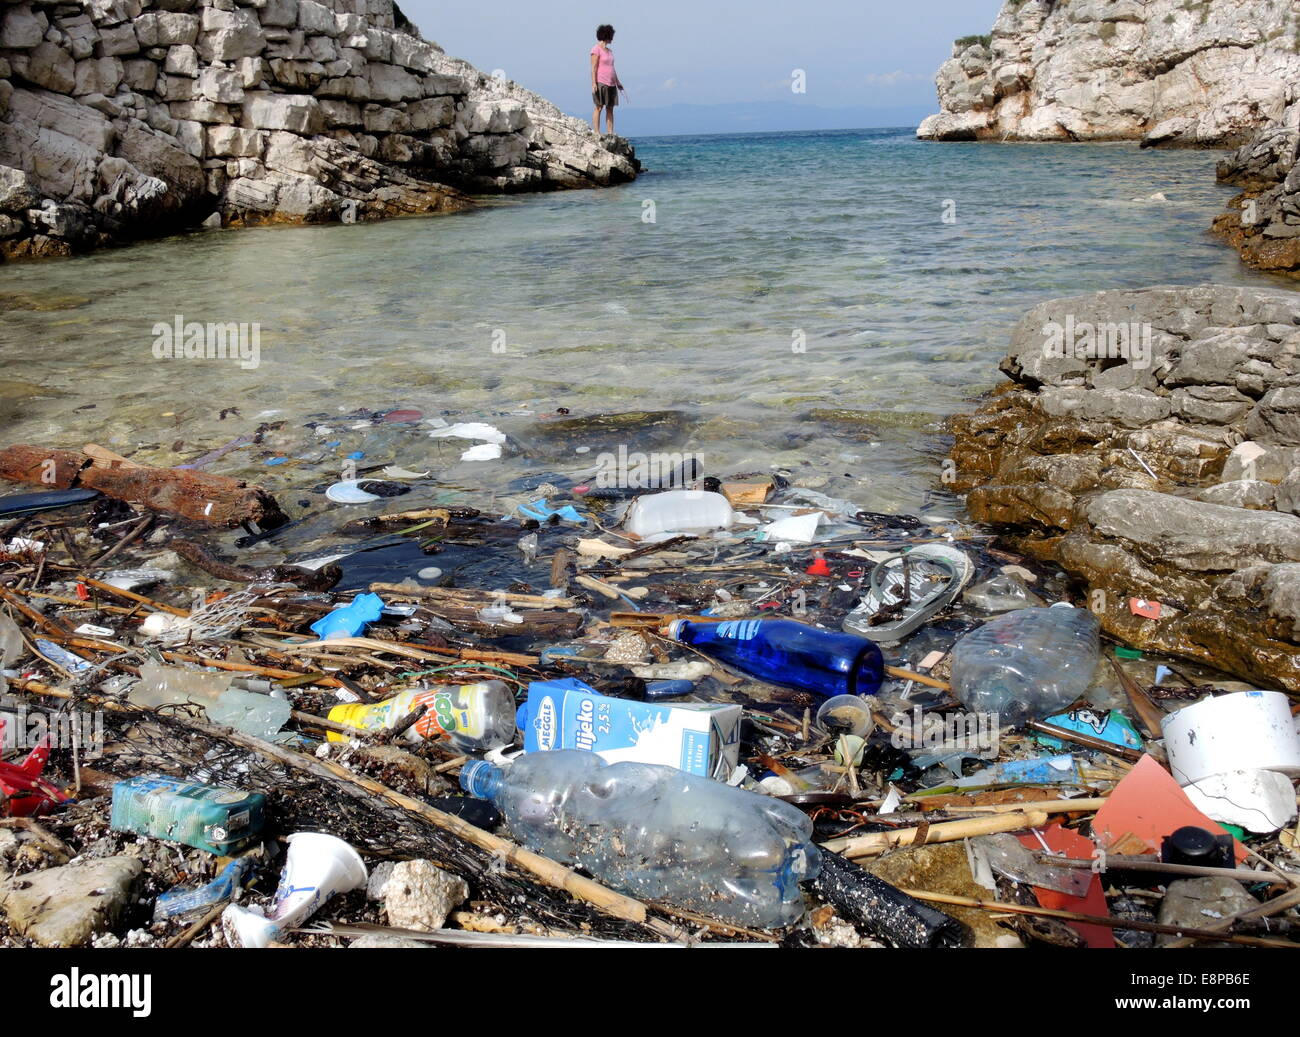 Washed up plastic waste on a beach along the coast of the croatian island of Lastovo, on September, 19, 2014. Stock Photo